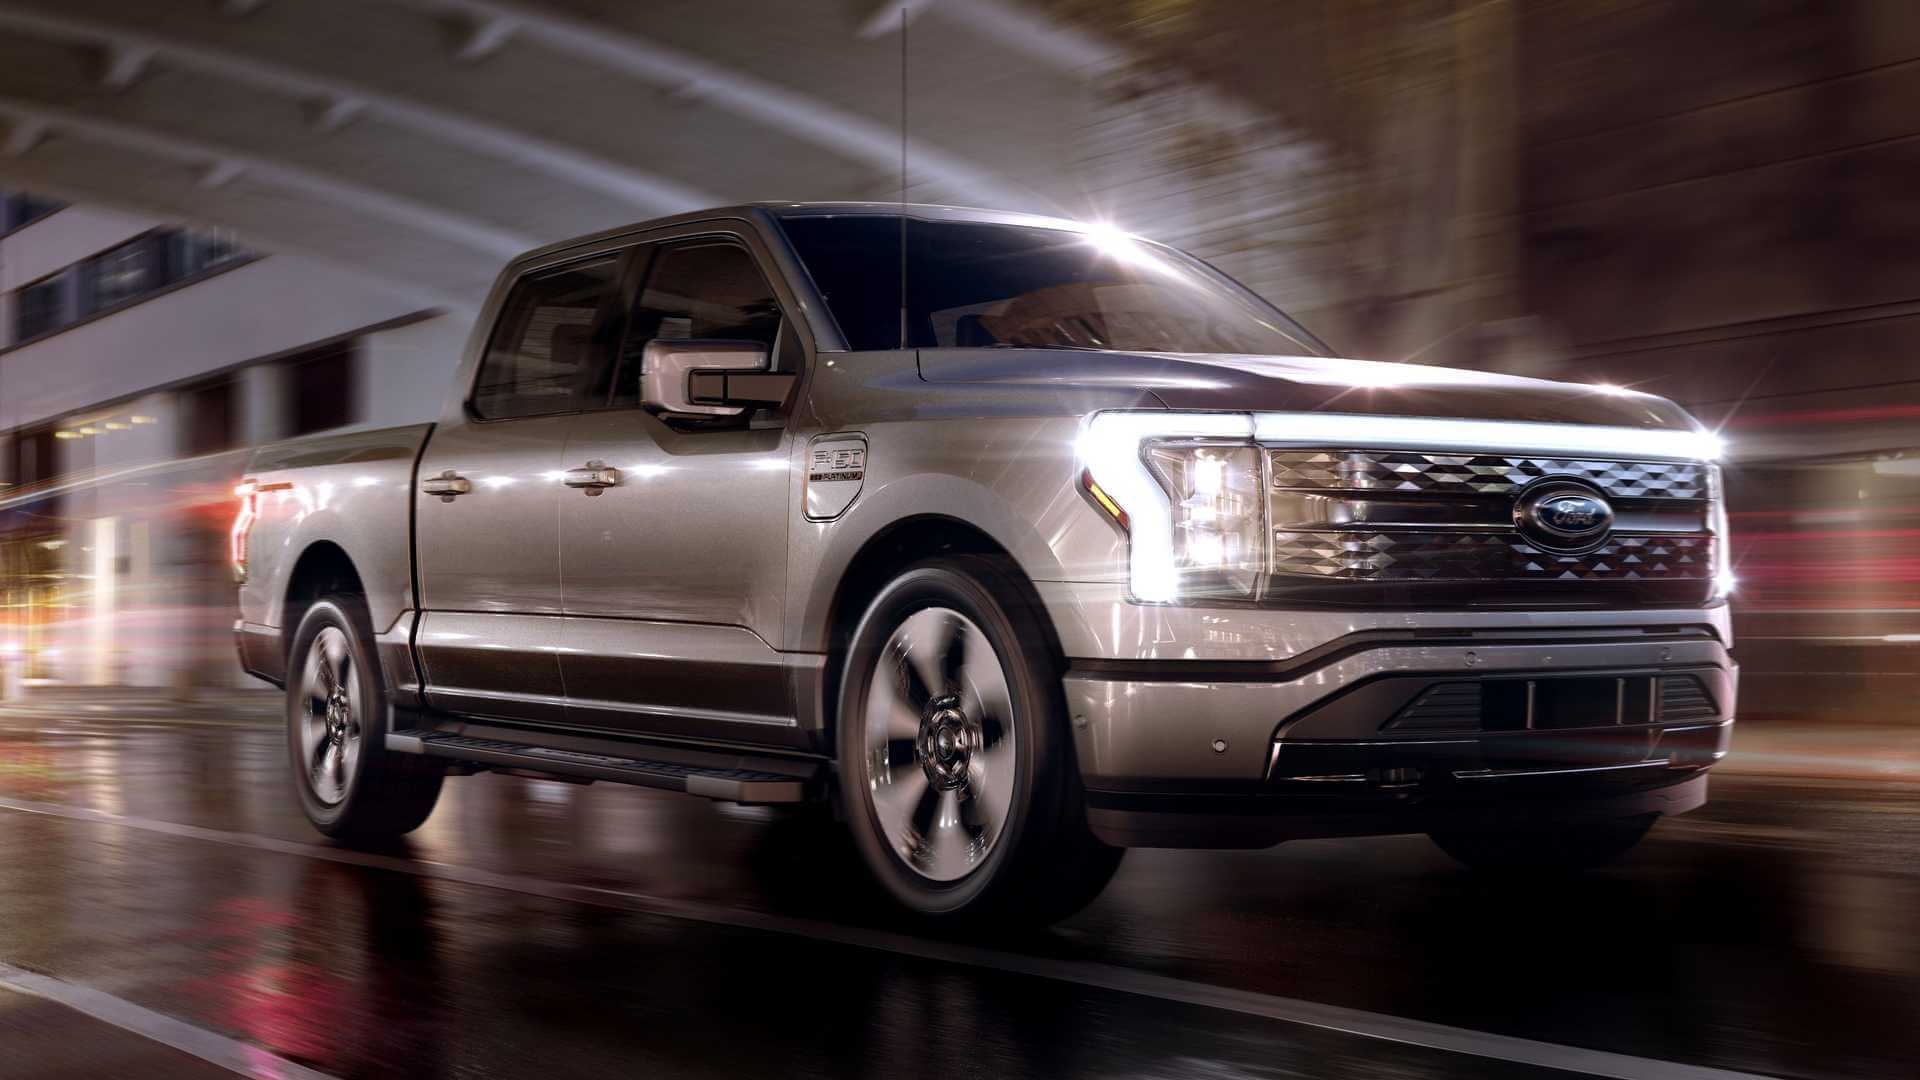 Best-Selling Pick-up Truck Ford F-150 Electrified & Turned into Mobile Charger